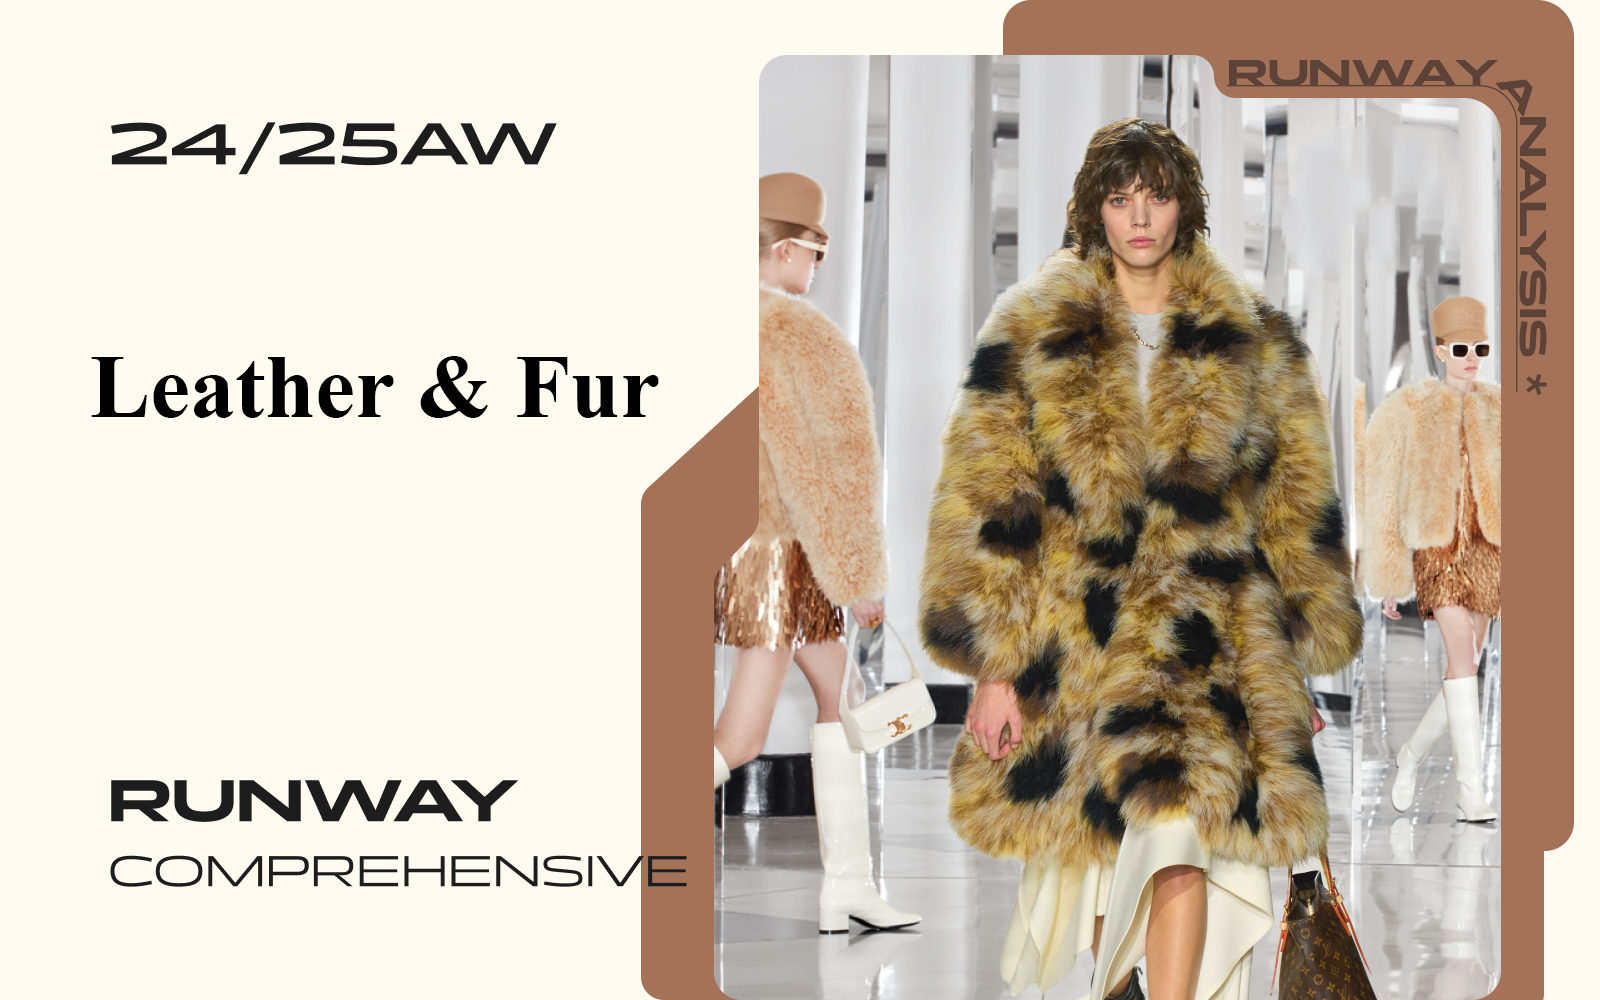 Leather & Fur -- The Comprehensive Analysis of Women's Runway (Part One)